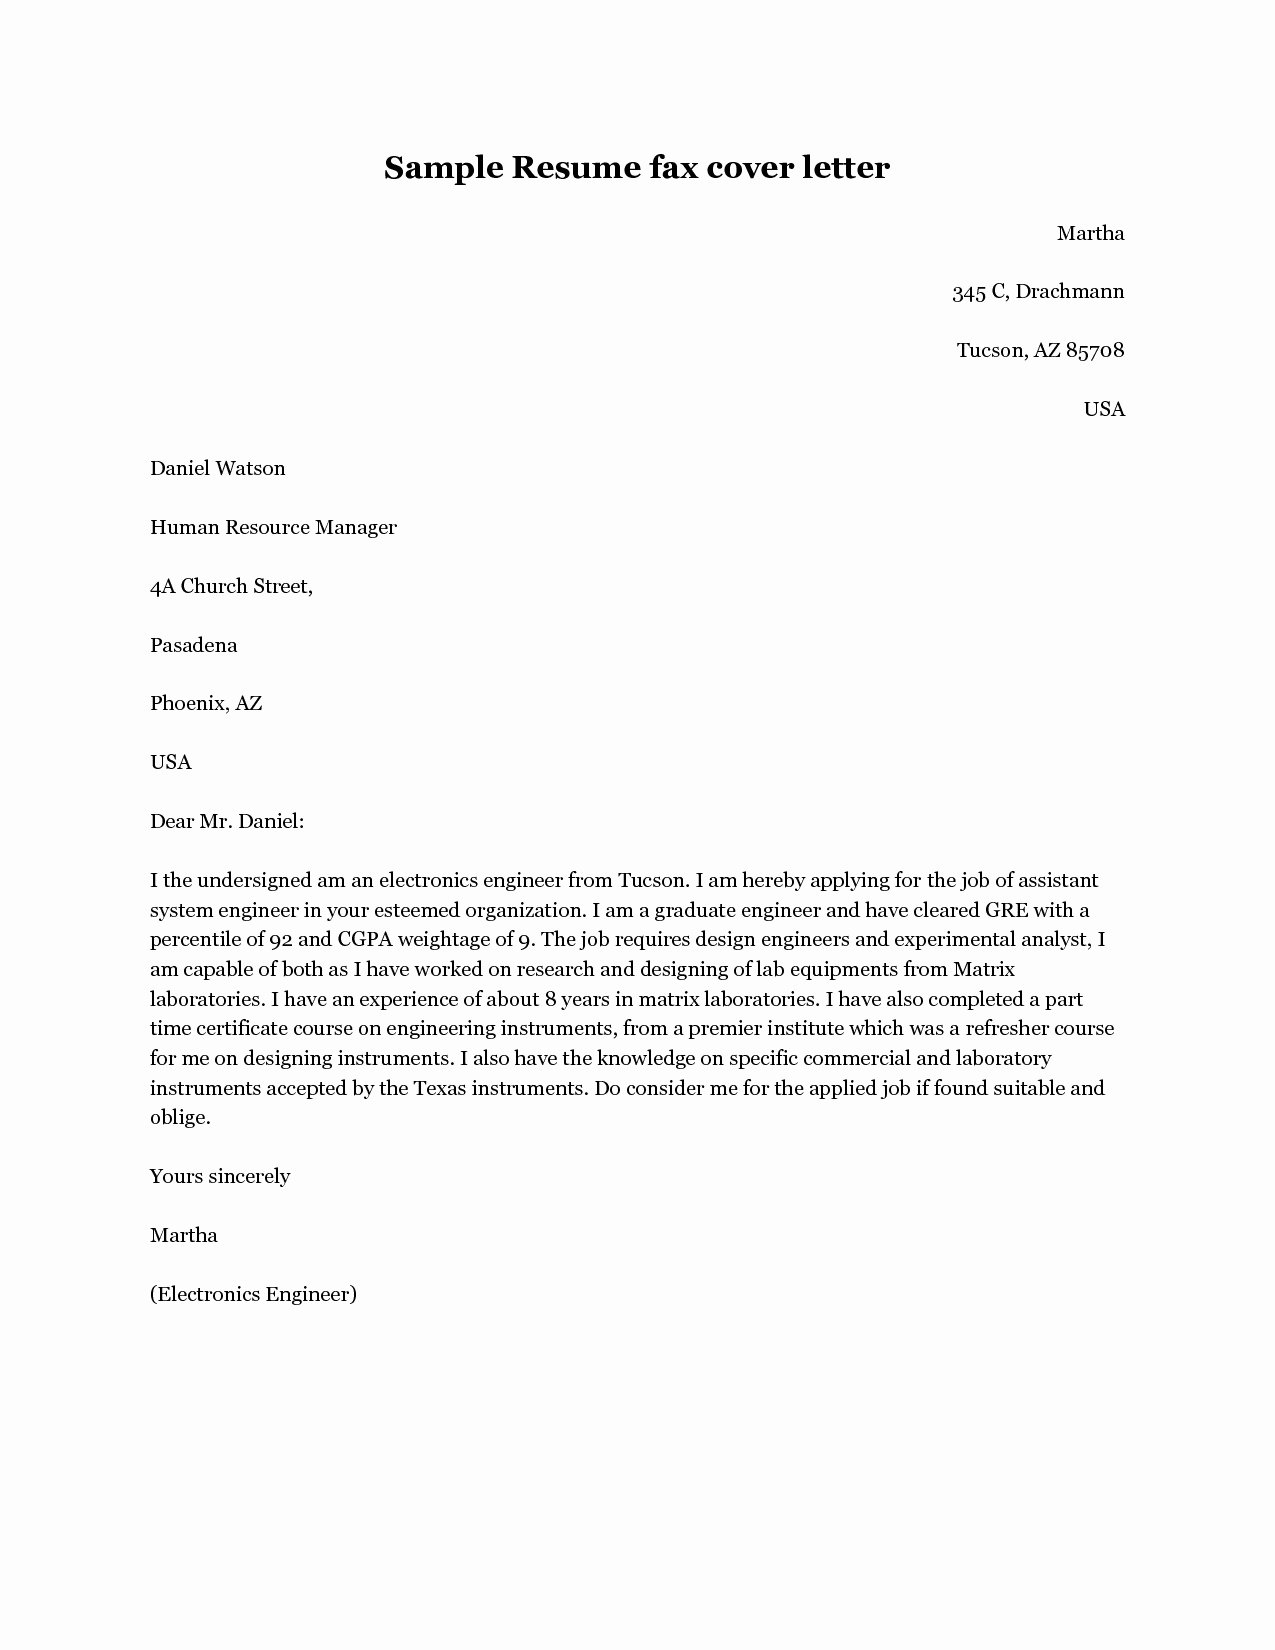 Cover Letter format Google Docs Beautiful Fax Cover Letter Template Google Docs Samples